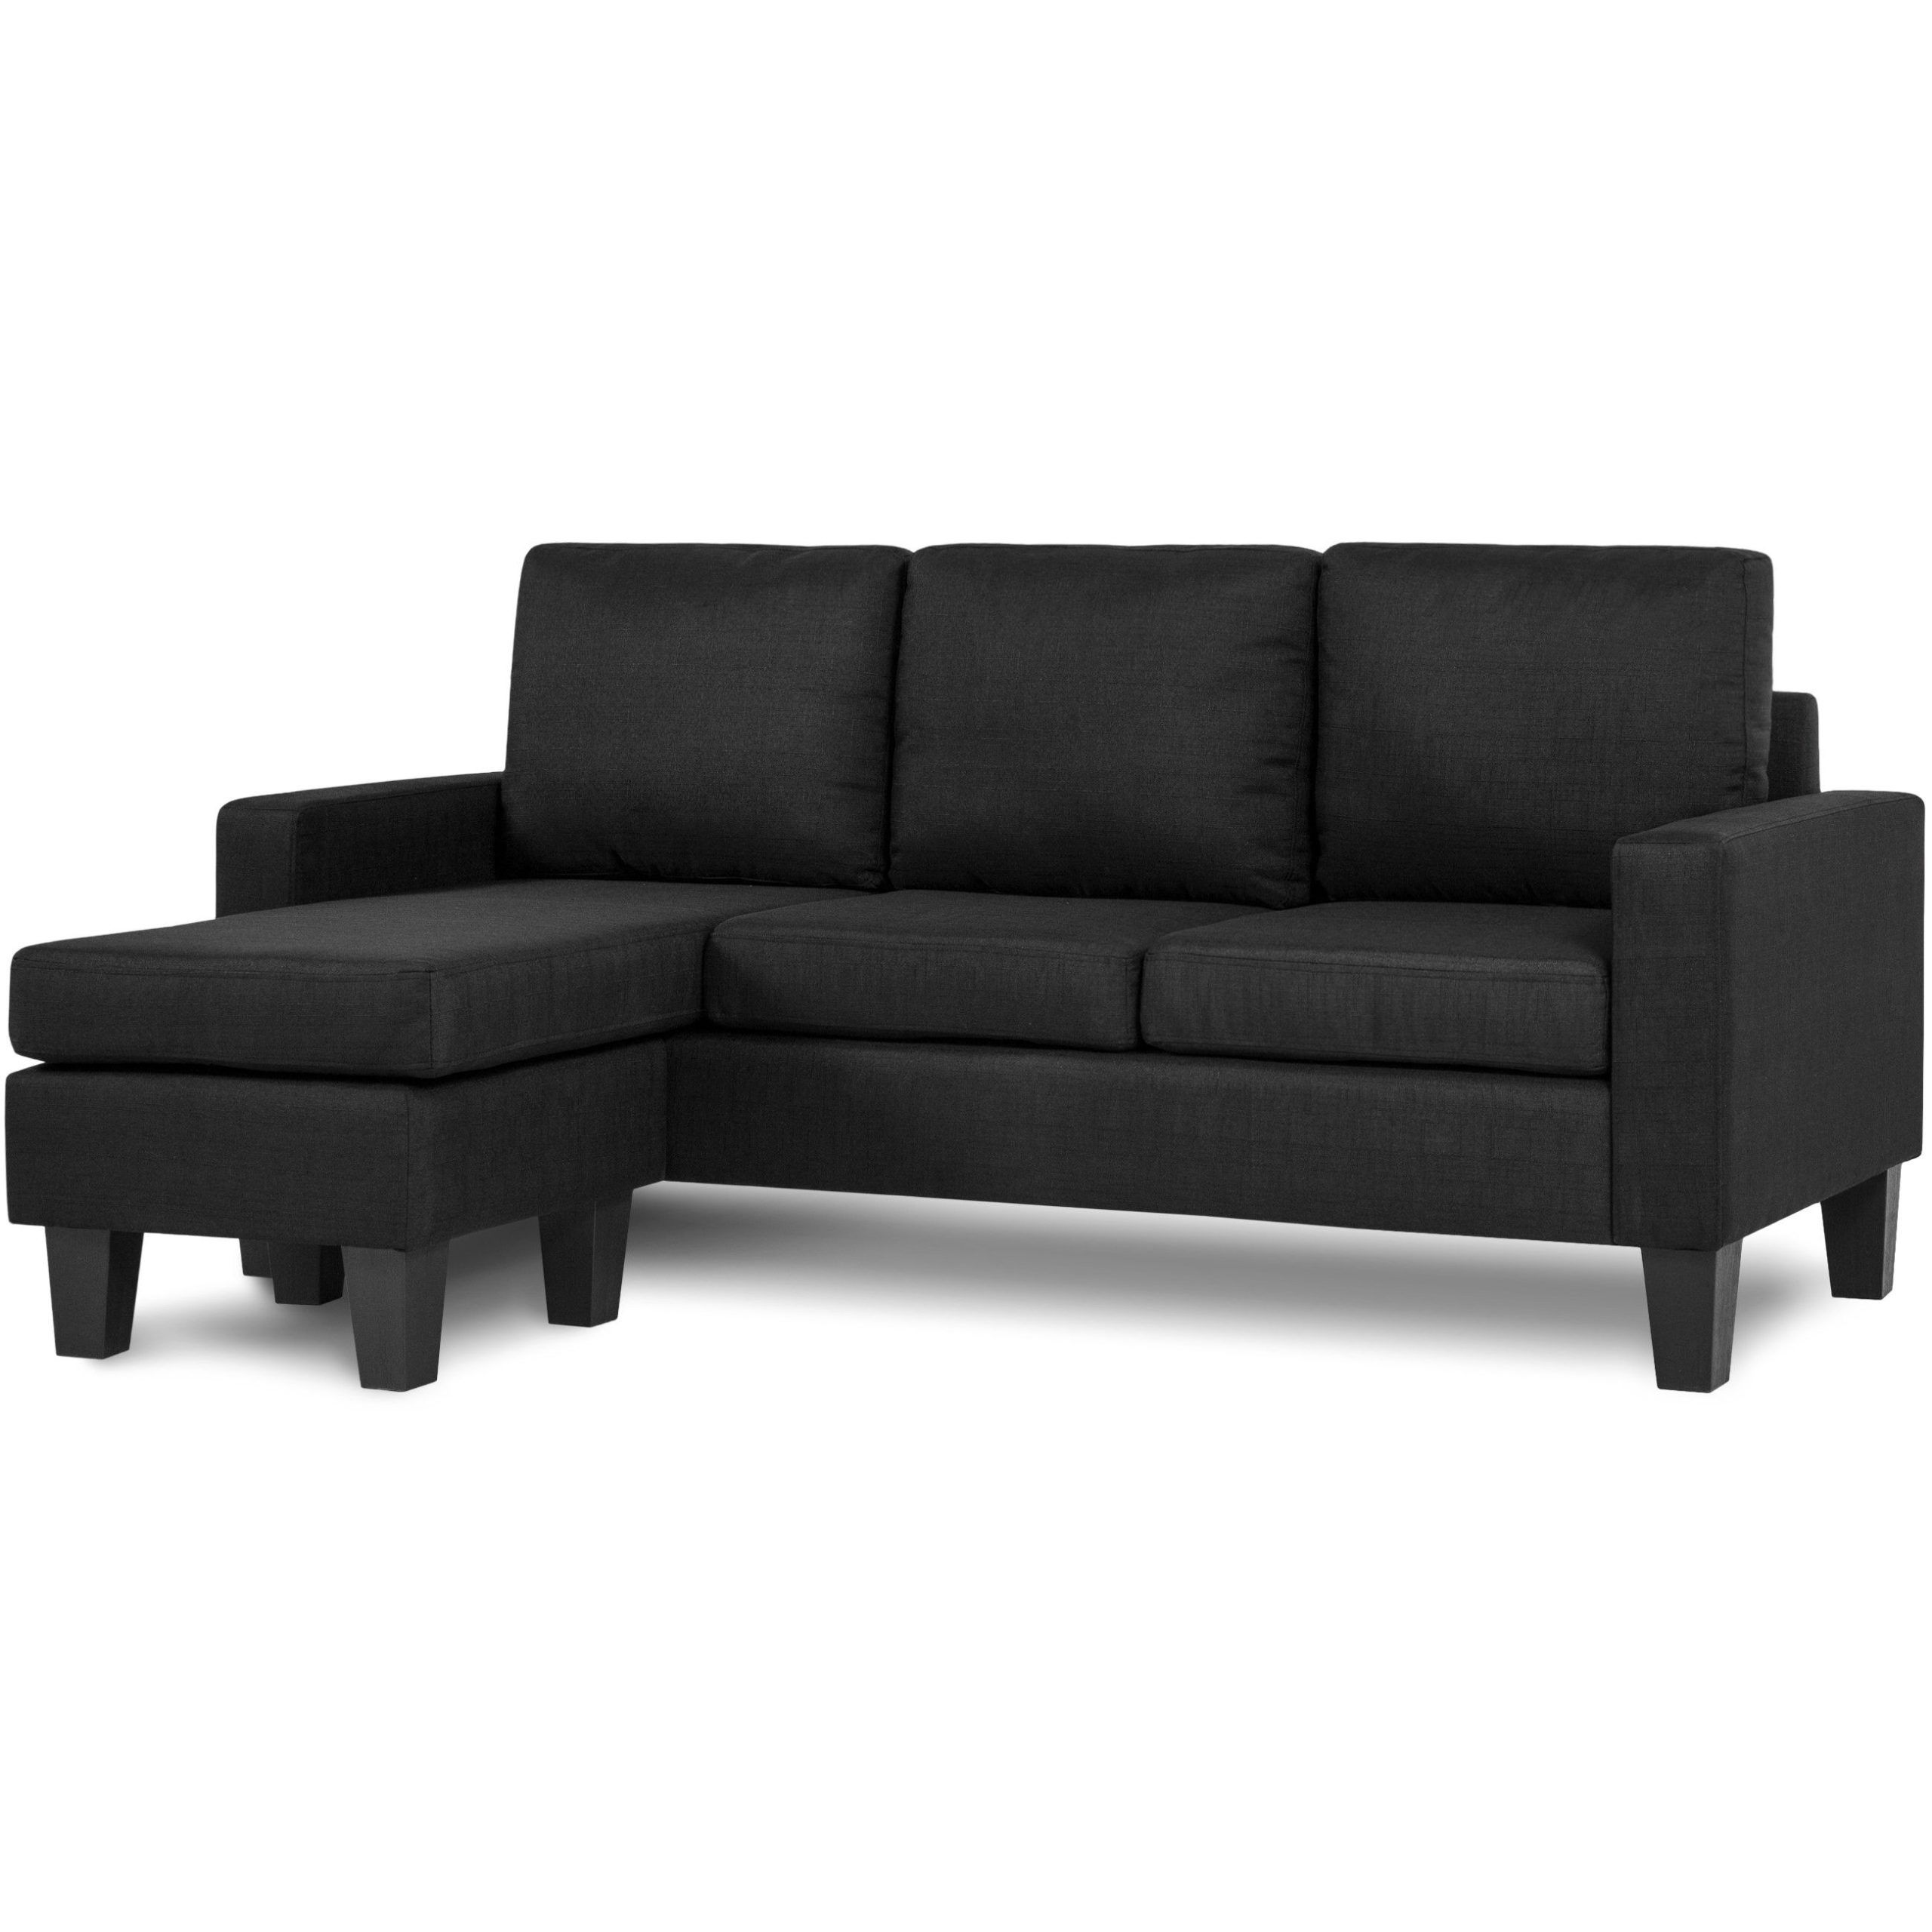 Best Choice Products Multifunctional Linen 3 Seat L Shape Sectional Pertaining To 3 Seat L Shaped Sofas In Black (View 13 of 20)